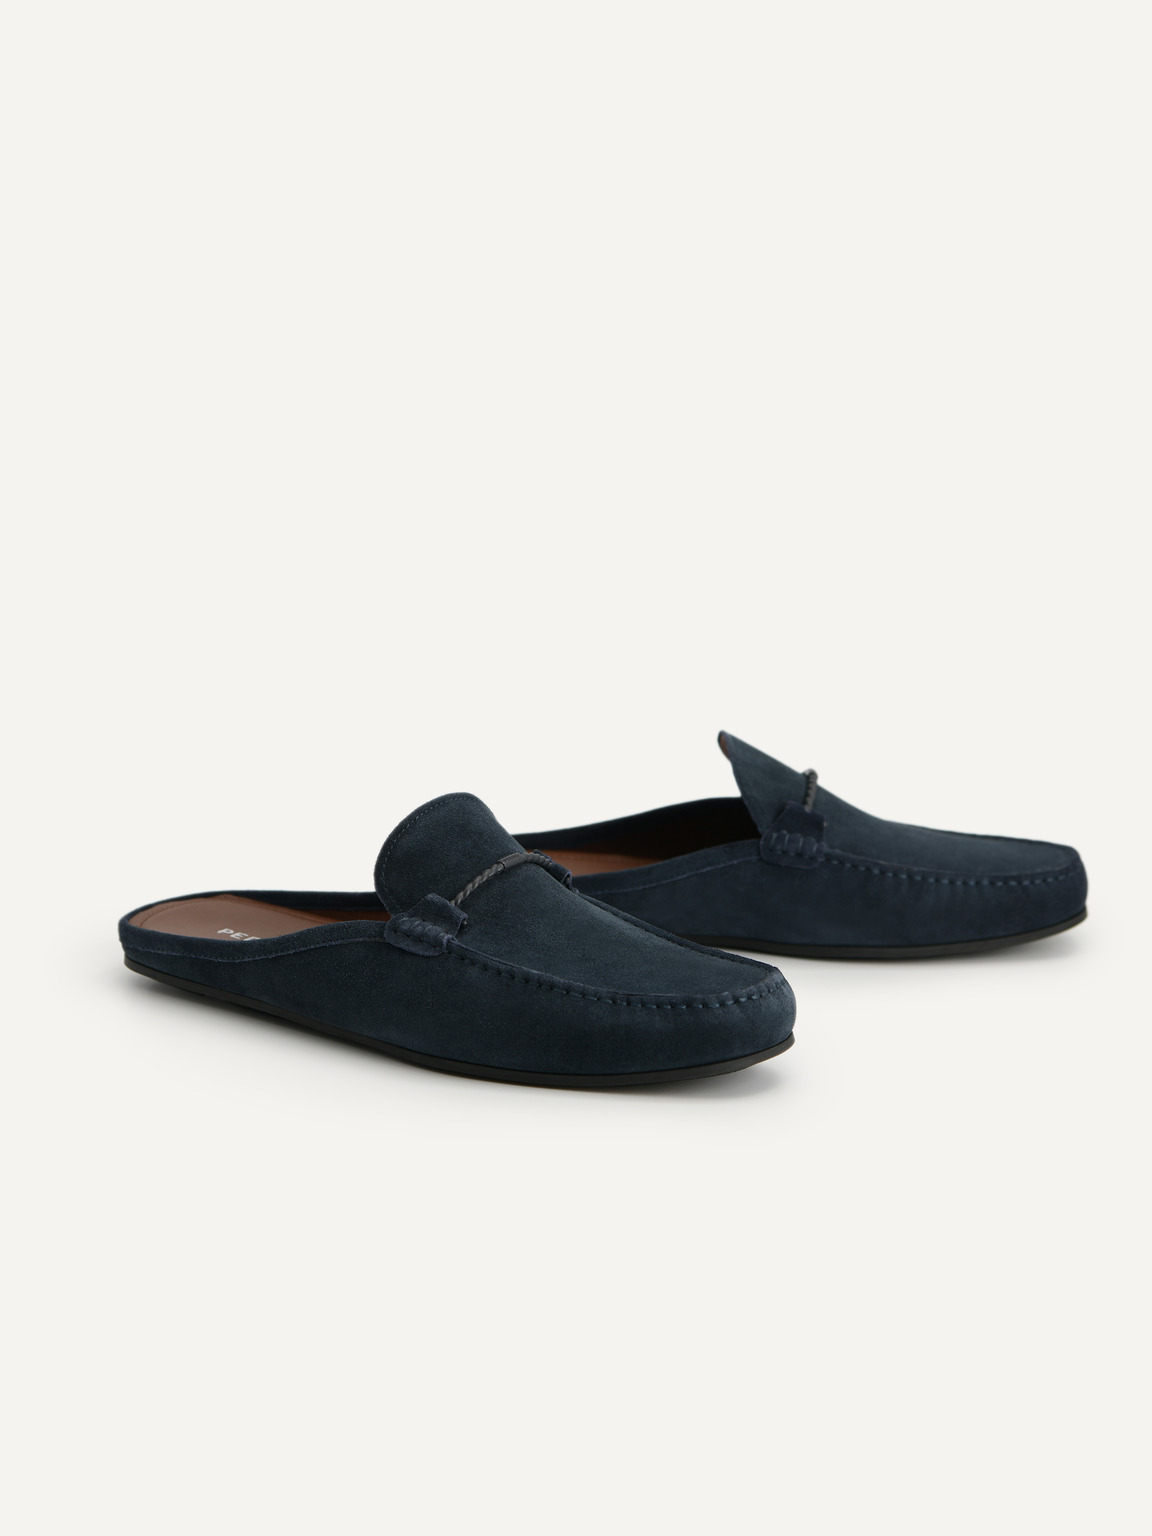 Suede Slip-On Driving Shoes, Navy